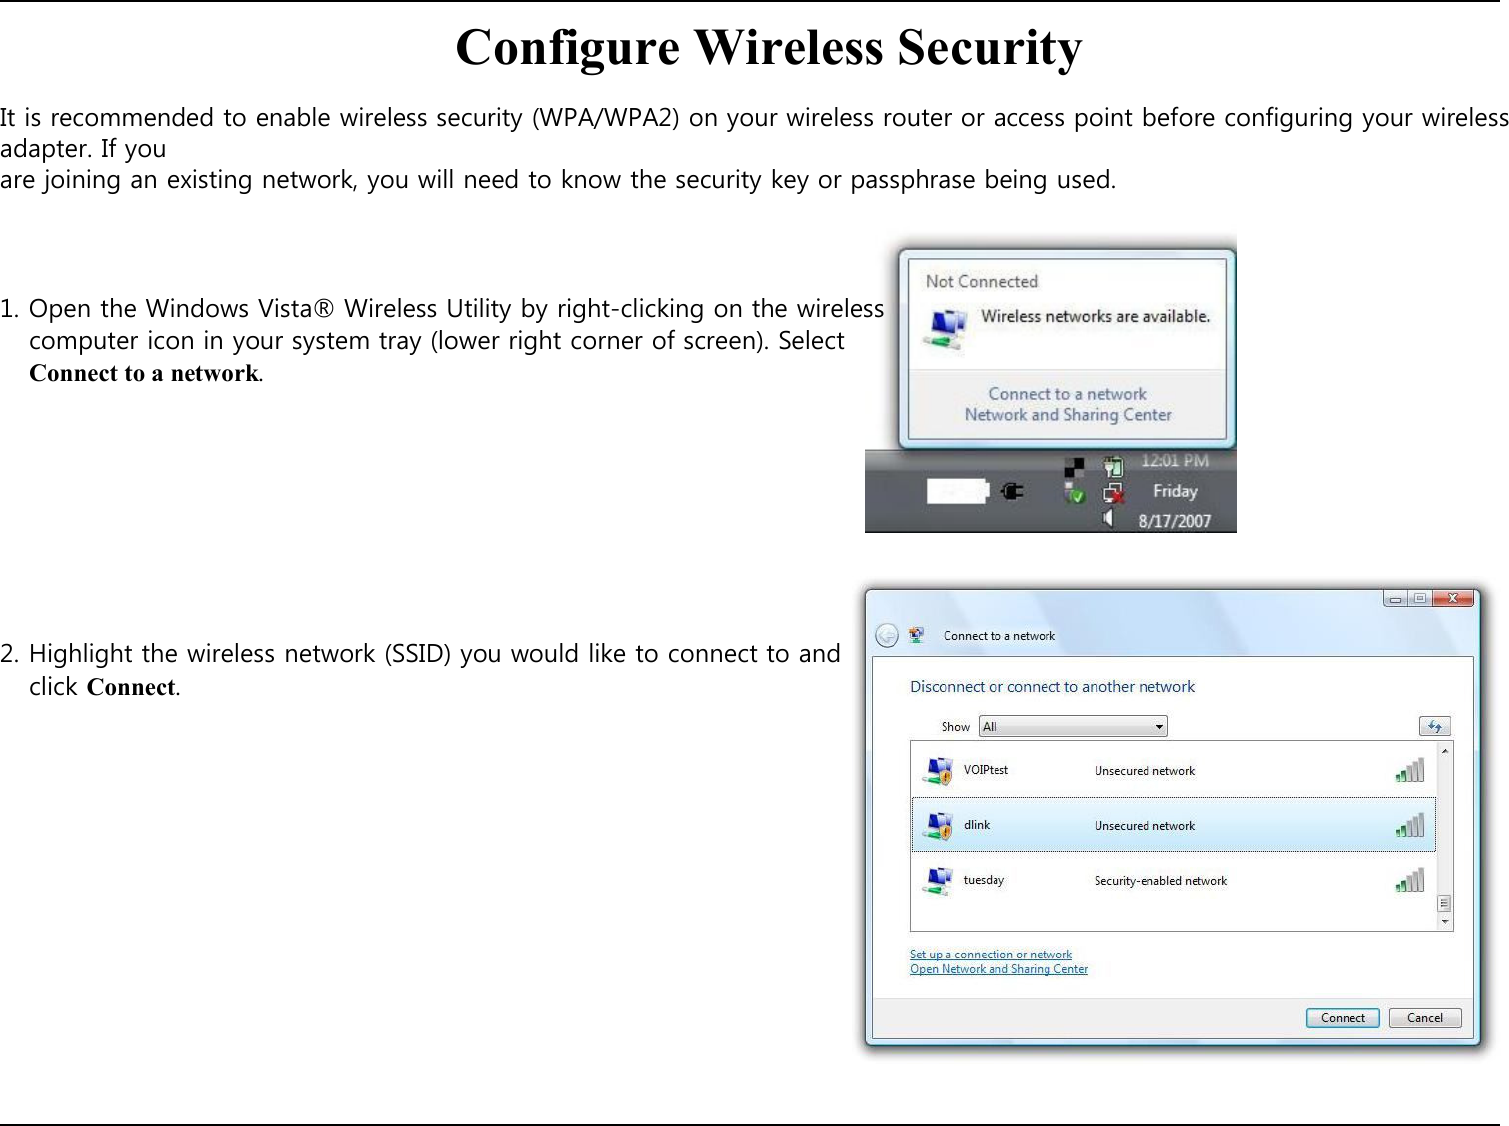   Configure Wireless Security  It is recommended to enable wireless security (WPA/WPA2) on your wireless router or access point before configuring your wireless adapter. If you are joining an existing network, you will need to know the security key or passphrase being used.     1. Open the Windows Vista® Wireless Utility by right-clicking on the wireless computer icon in your system tray (lower right corner of screen). Select Connect to a network.            2. Highlight the wireless network (SSID) you would like to connect to and click Connect.                      